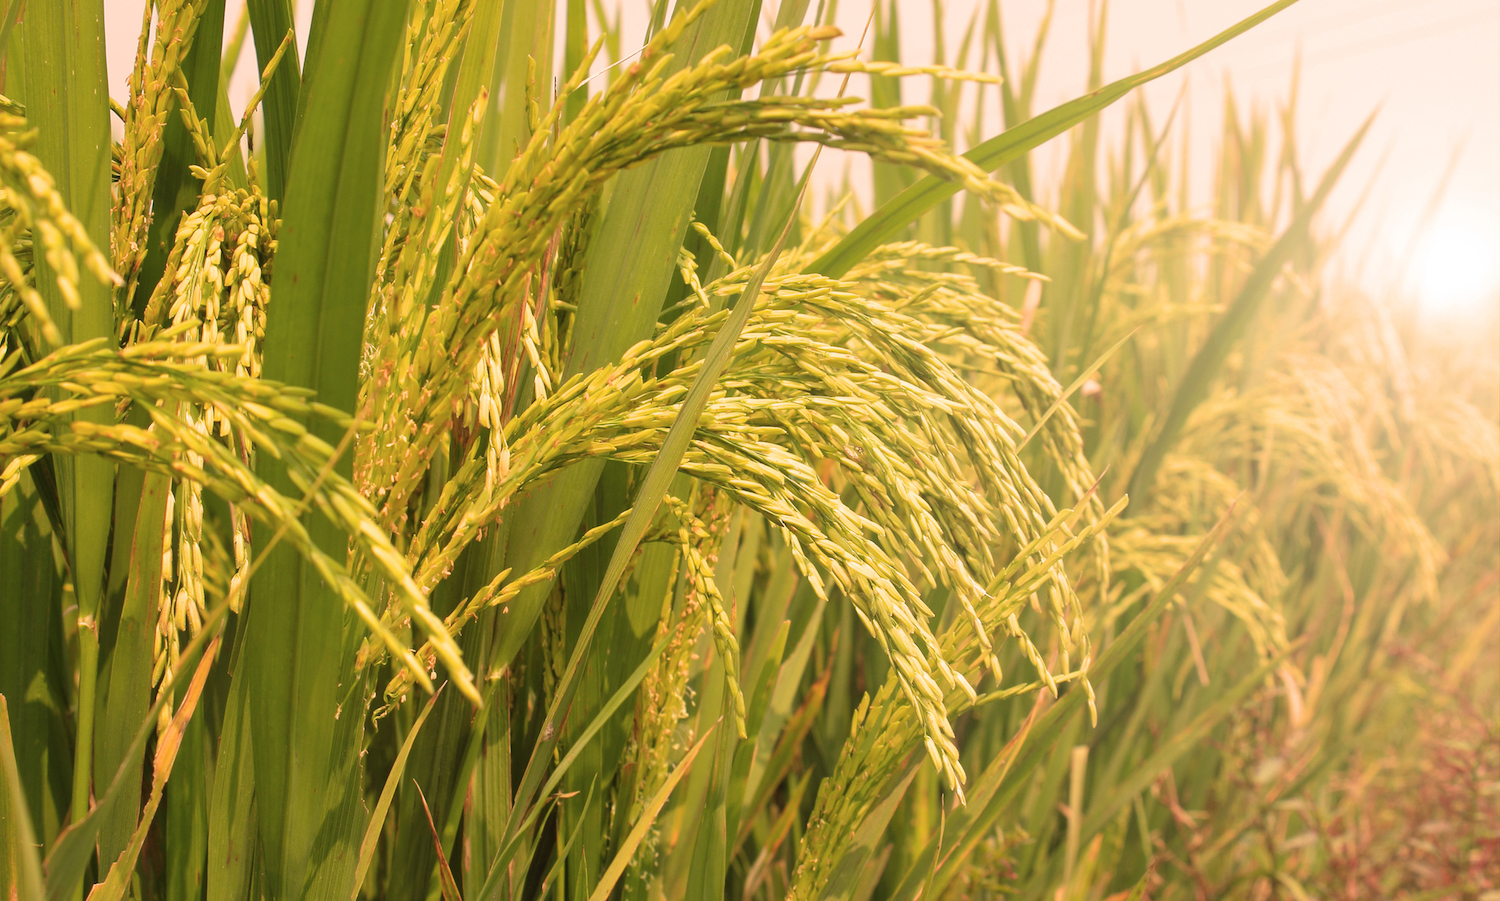 Seed Priming with Salts of Nitrate Enhances Nitrogen use Efficiency in Rice